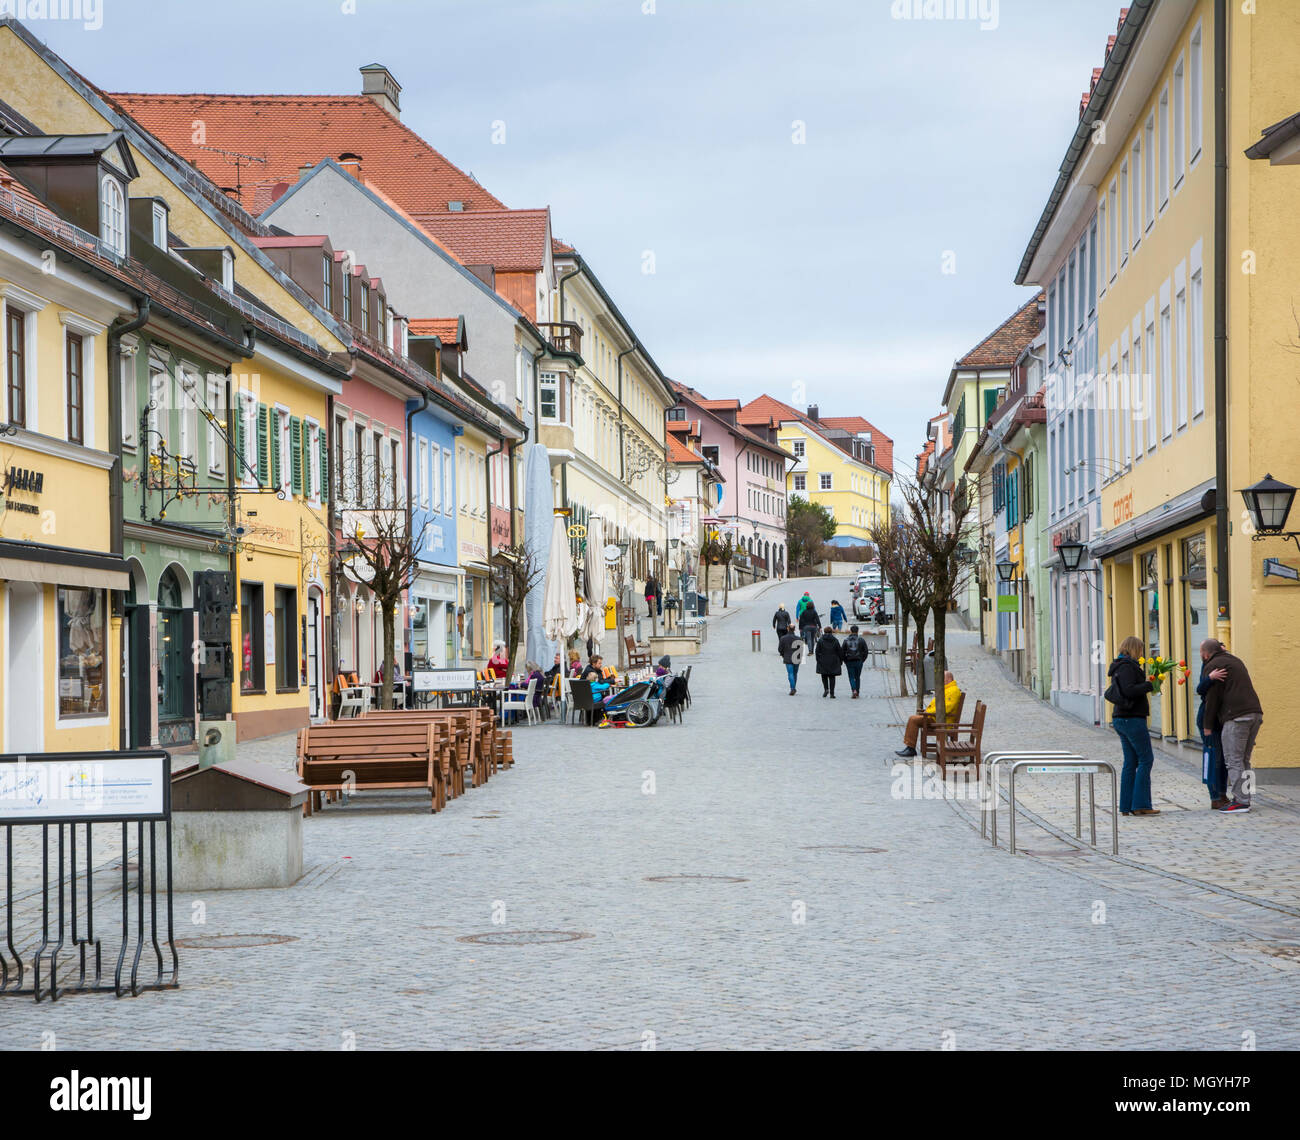 MURNAU, GERMANY - MARCH 11: Tourists in the pedestrian area of Murnau, Germany on March 11, 2018. Stock Photo